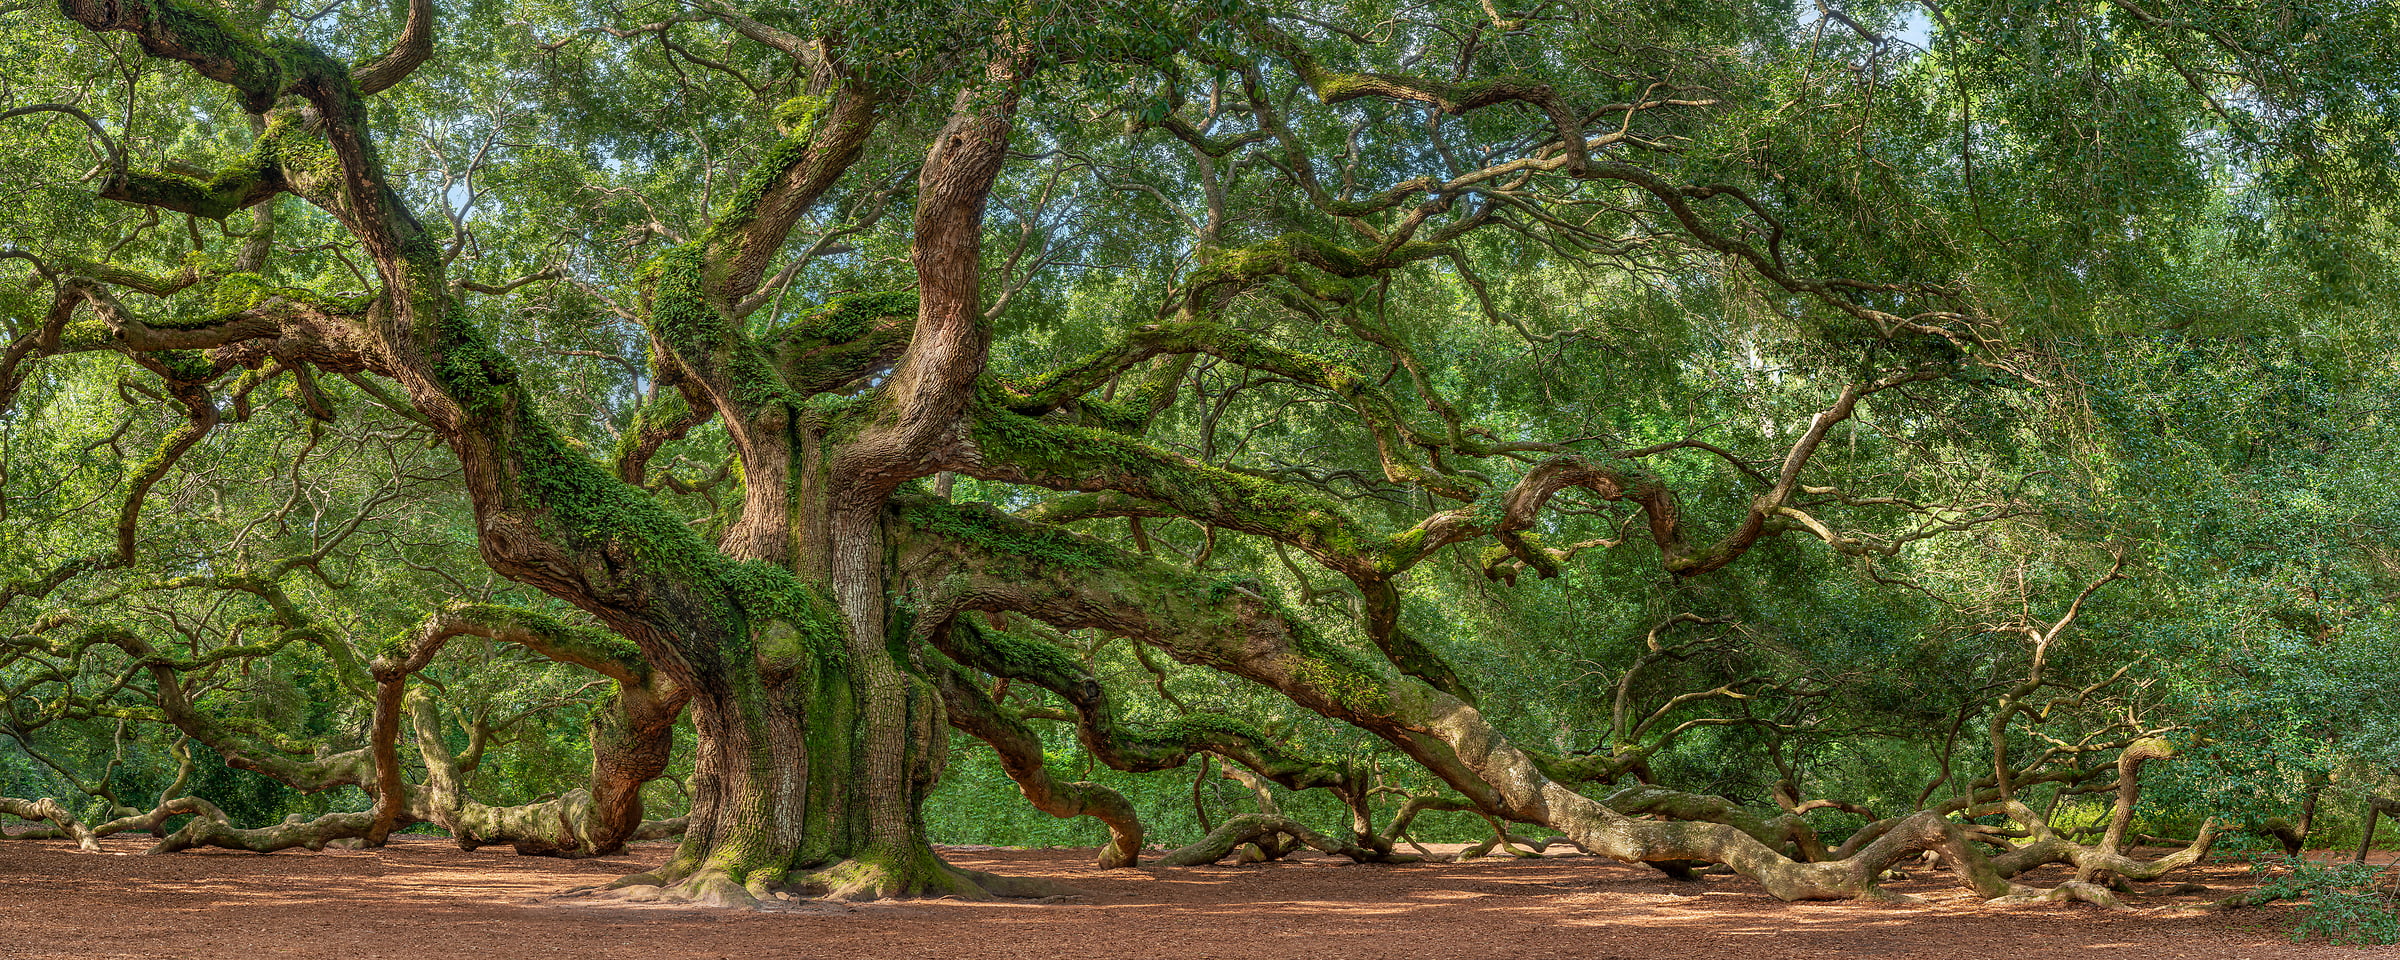 182 megapixels! A very high resolution, large-format VAST photo of a very big Oak tree; nature photograph created by Tim Lo Monaco in Angel Oak Park, Johns Island, South Carolina, USA.